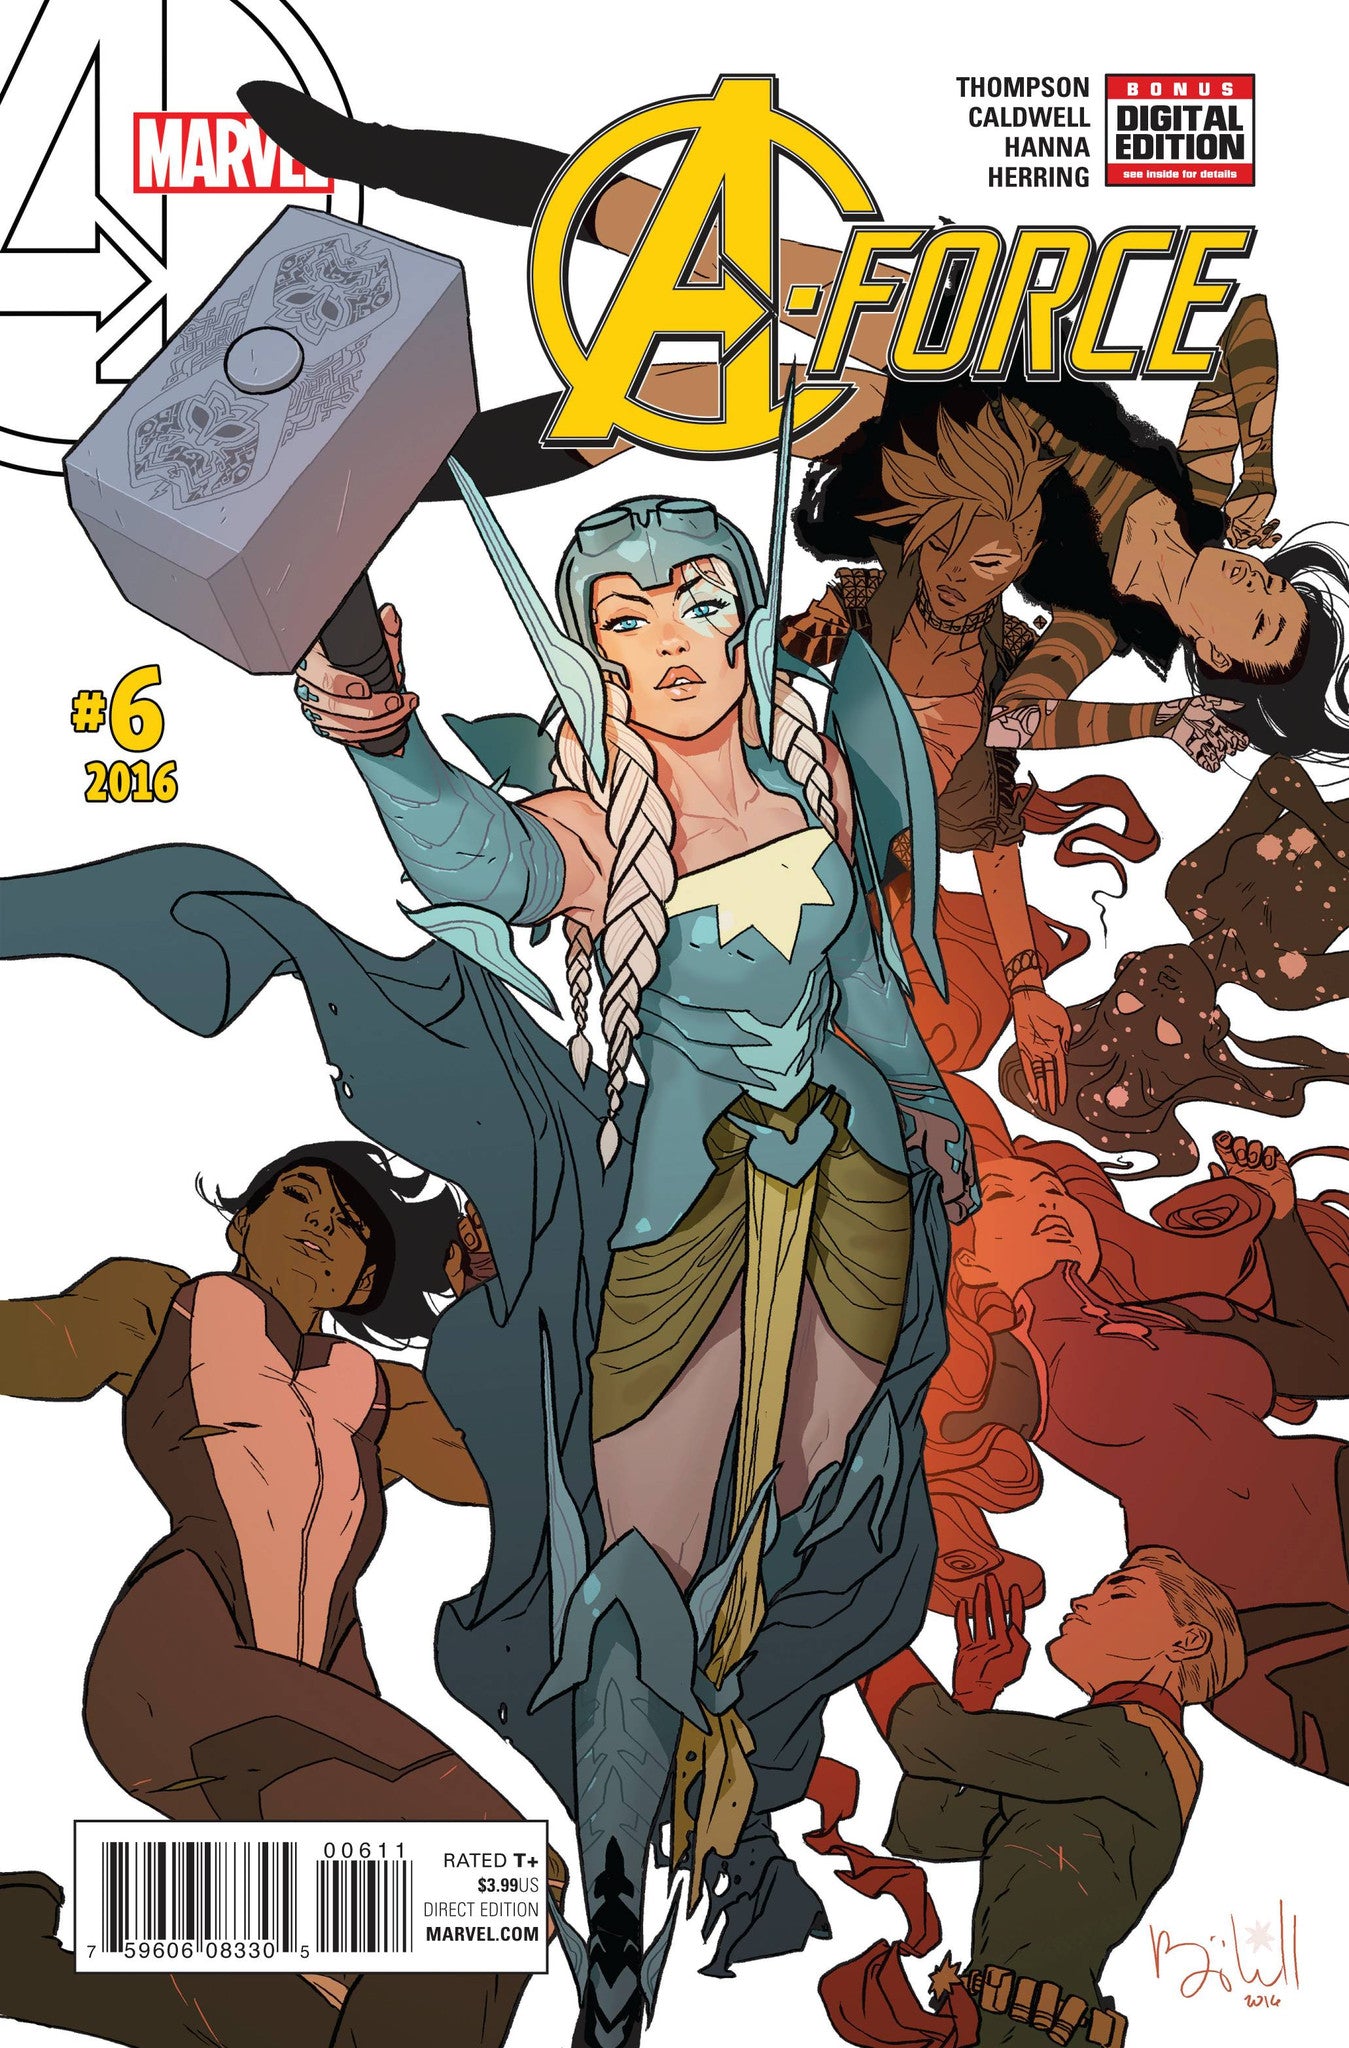 A-FORCE #6 COVER